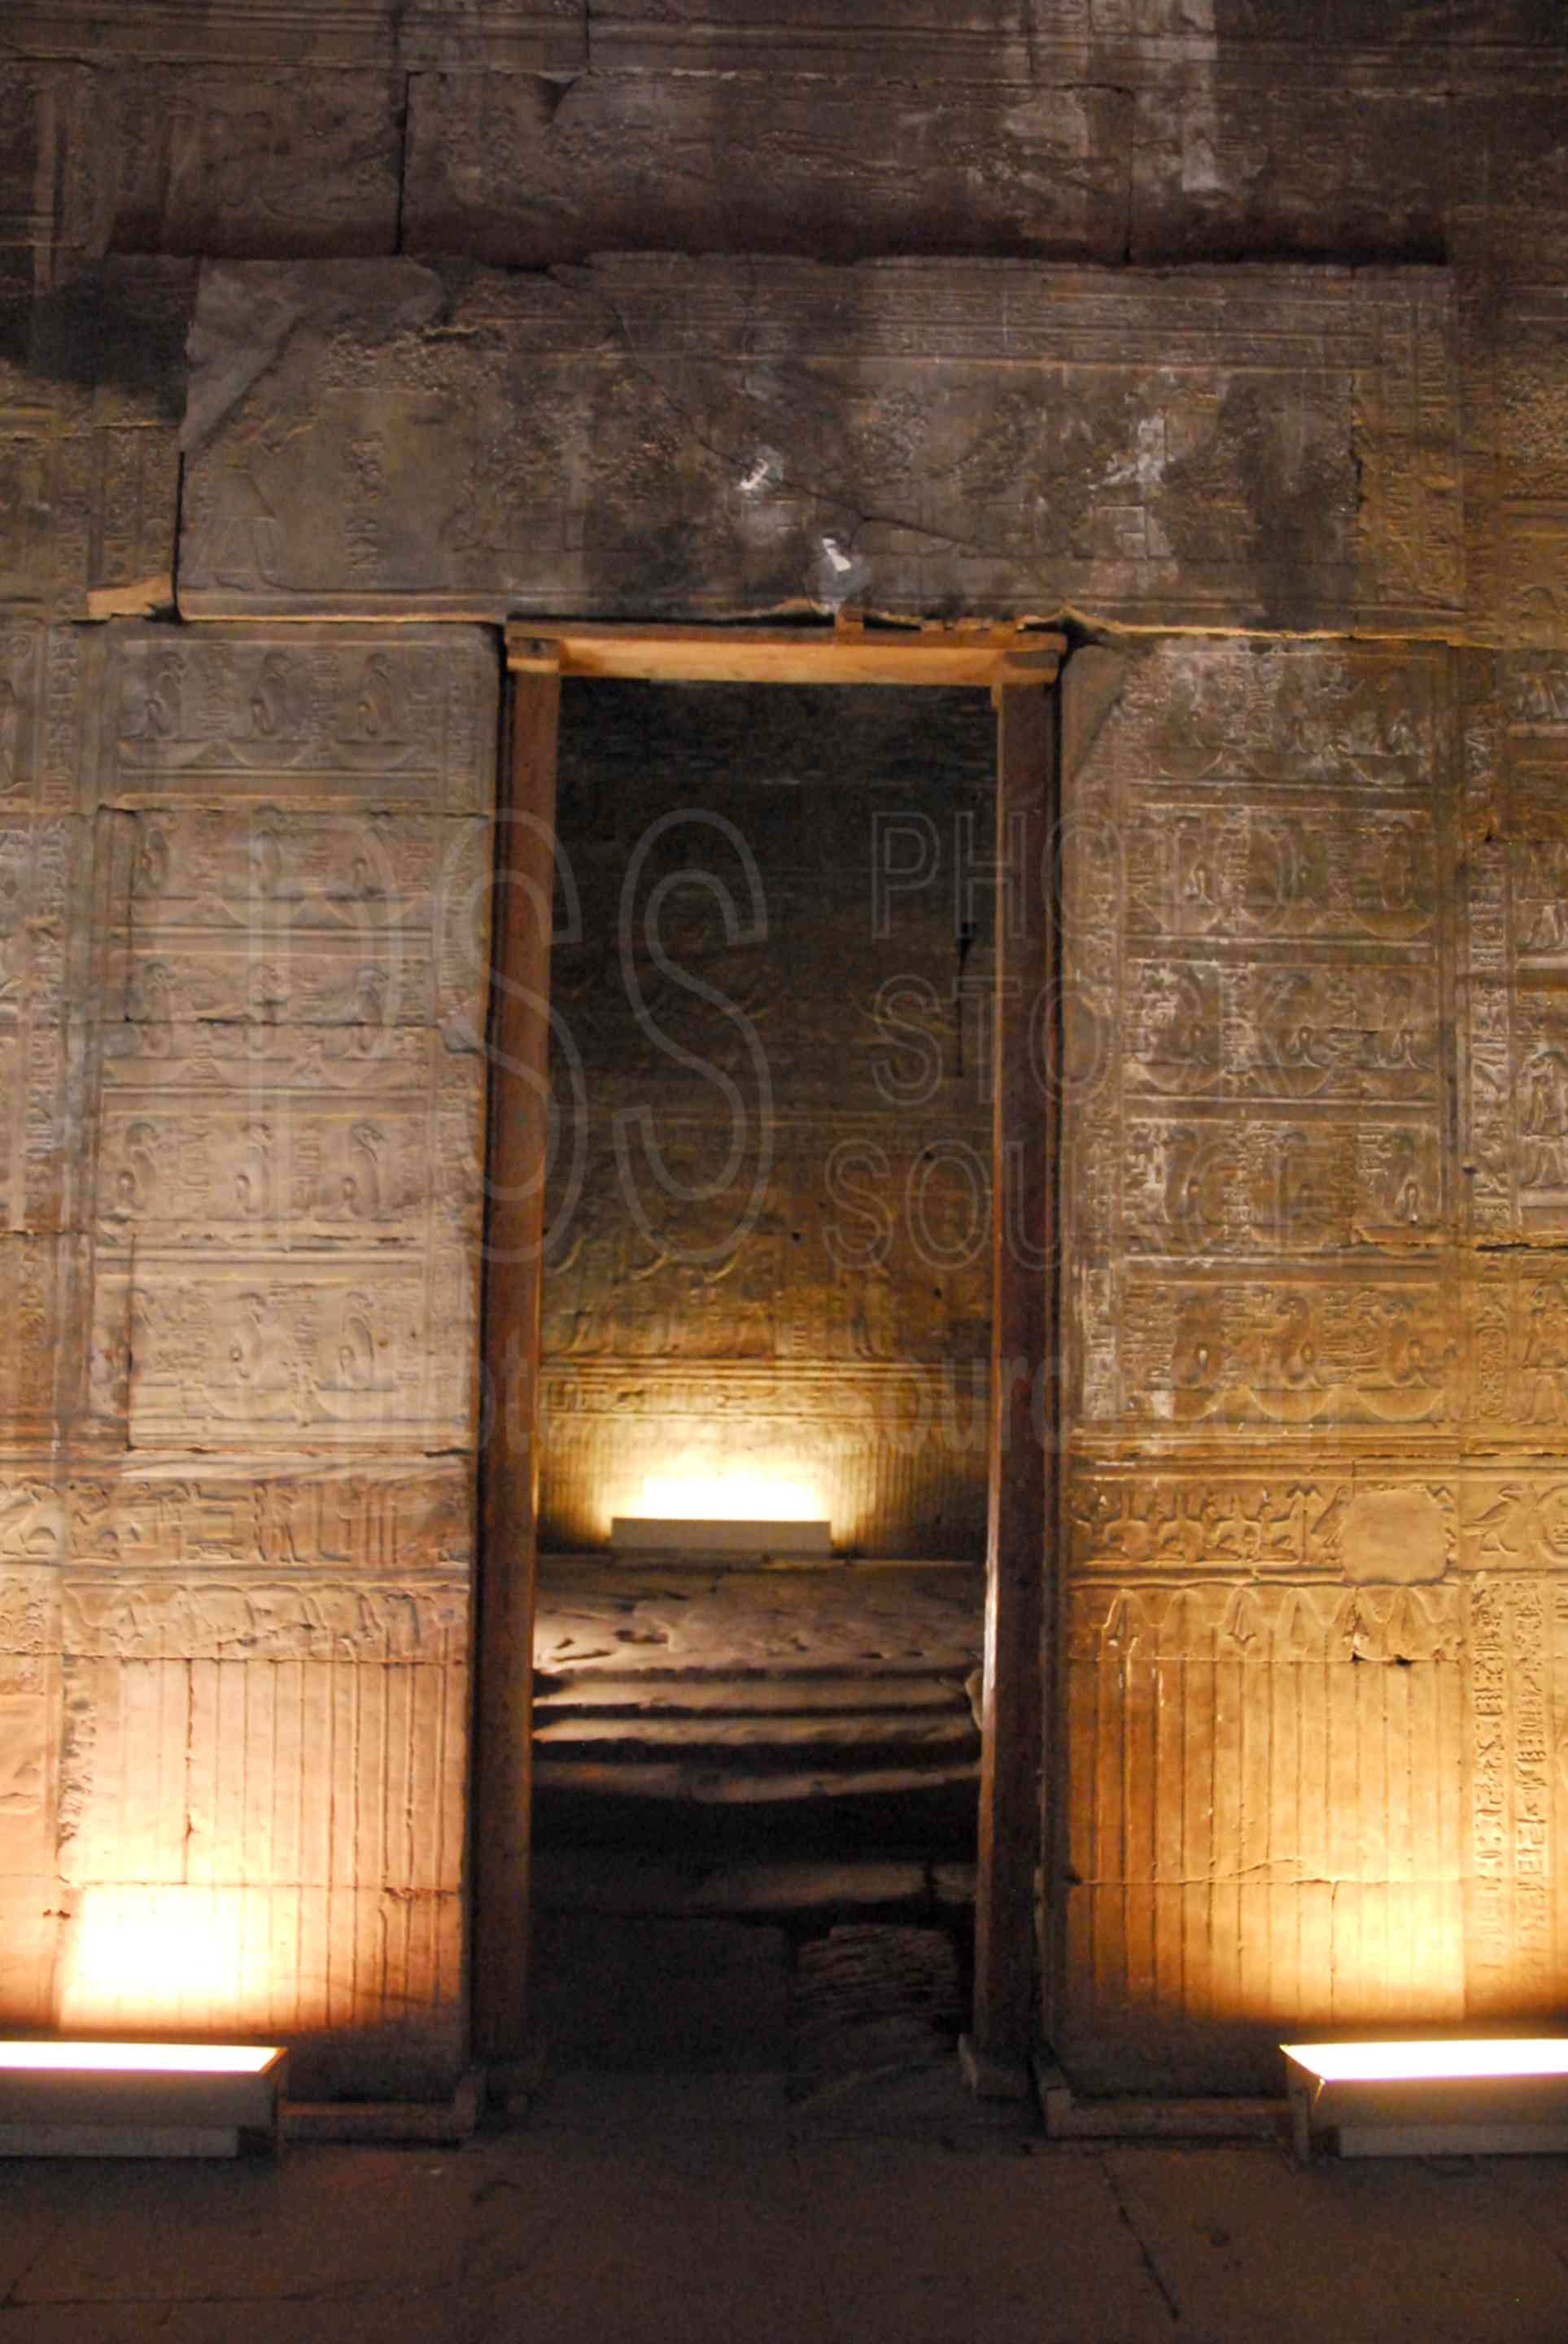 Offering Hall Entrance,temple,idfu,behdet,ptolemy,hieroglyphics,wall,architecture,temples